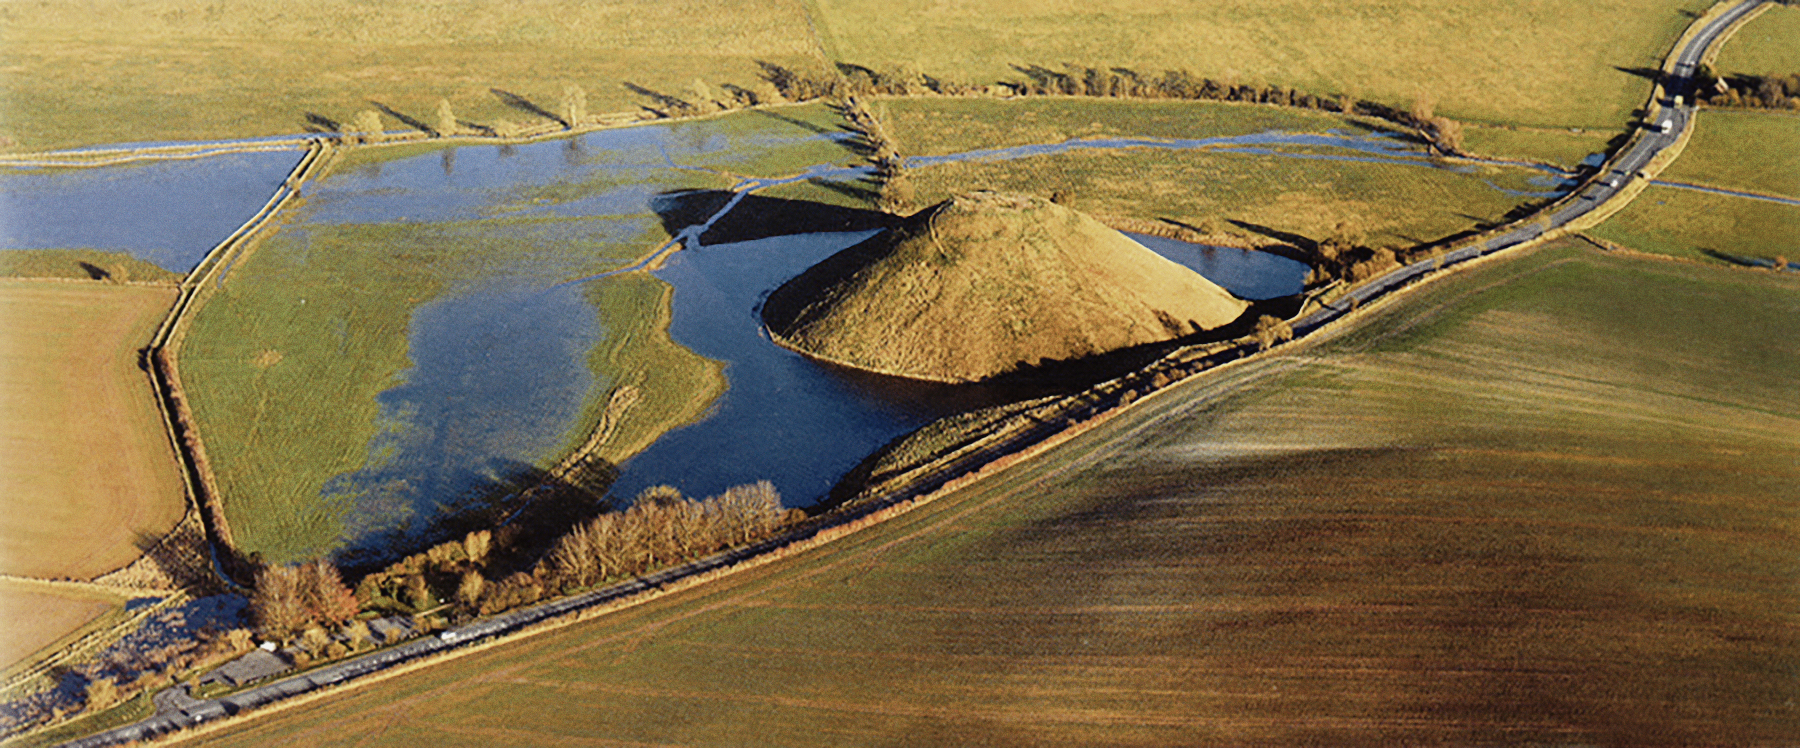 Overview of Silbury Hill